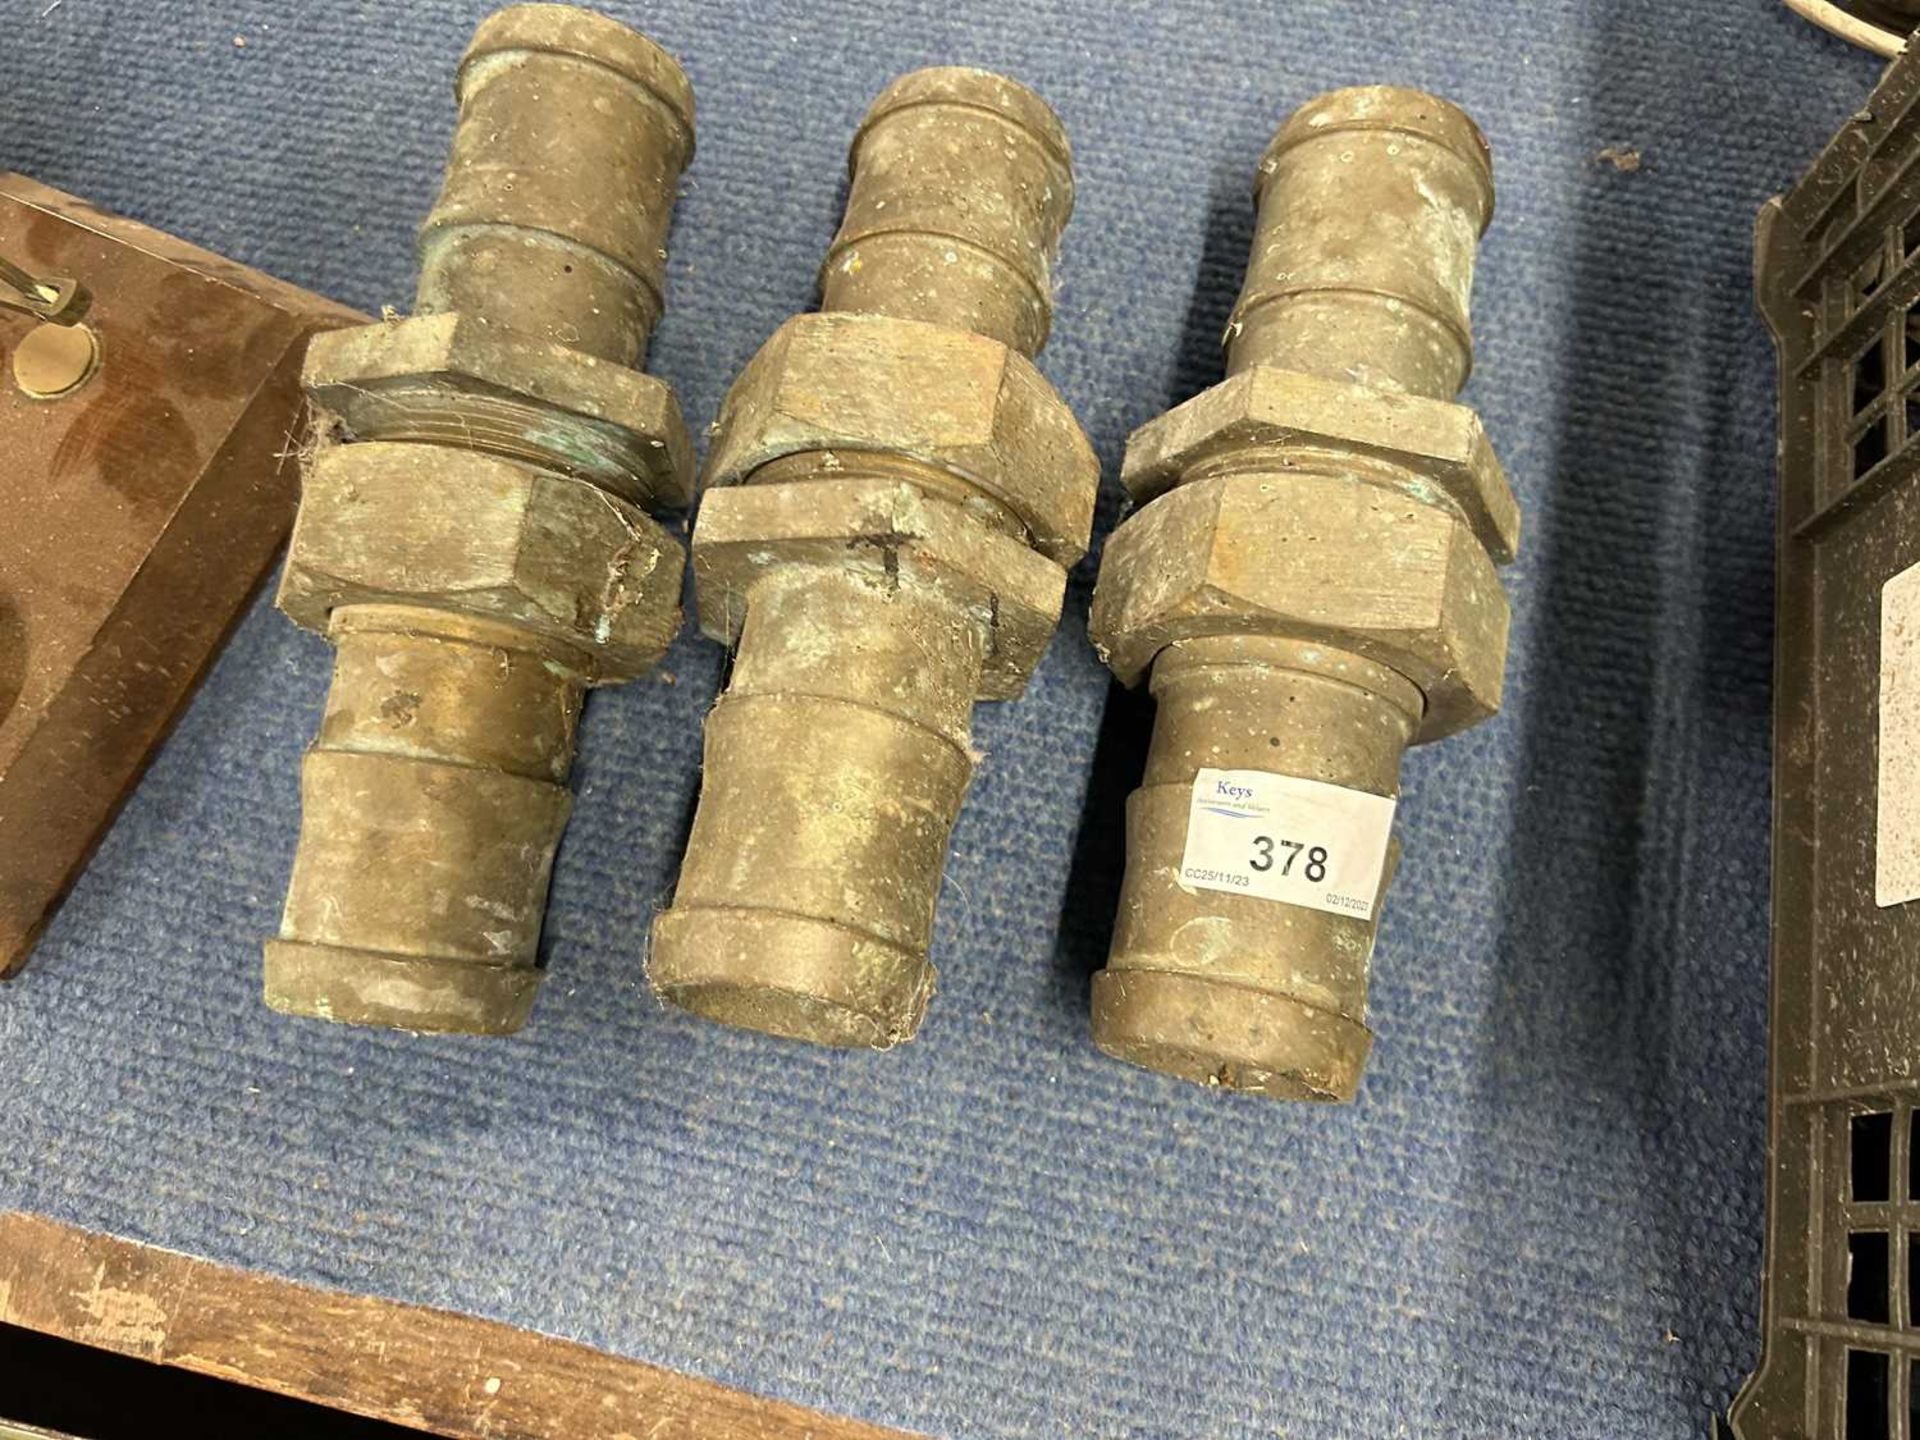 Three large threaded brass pipe connectors